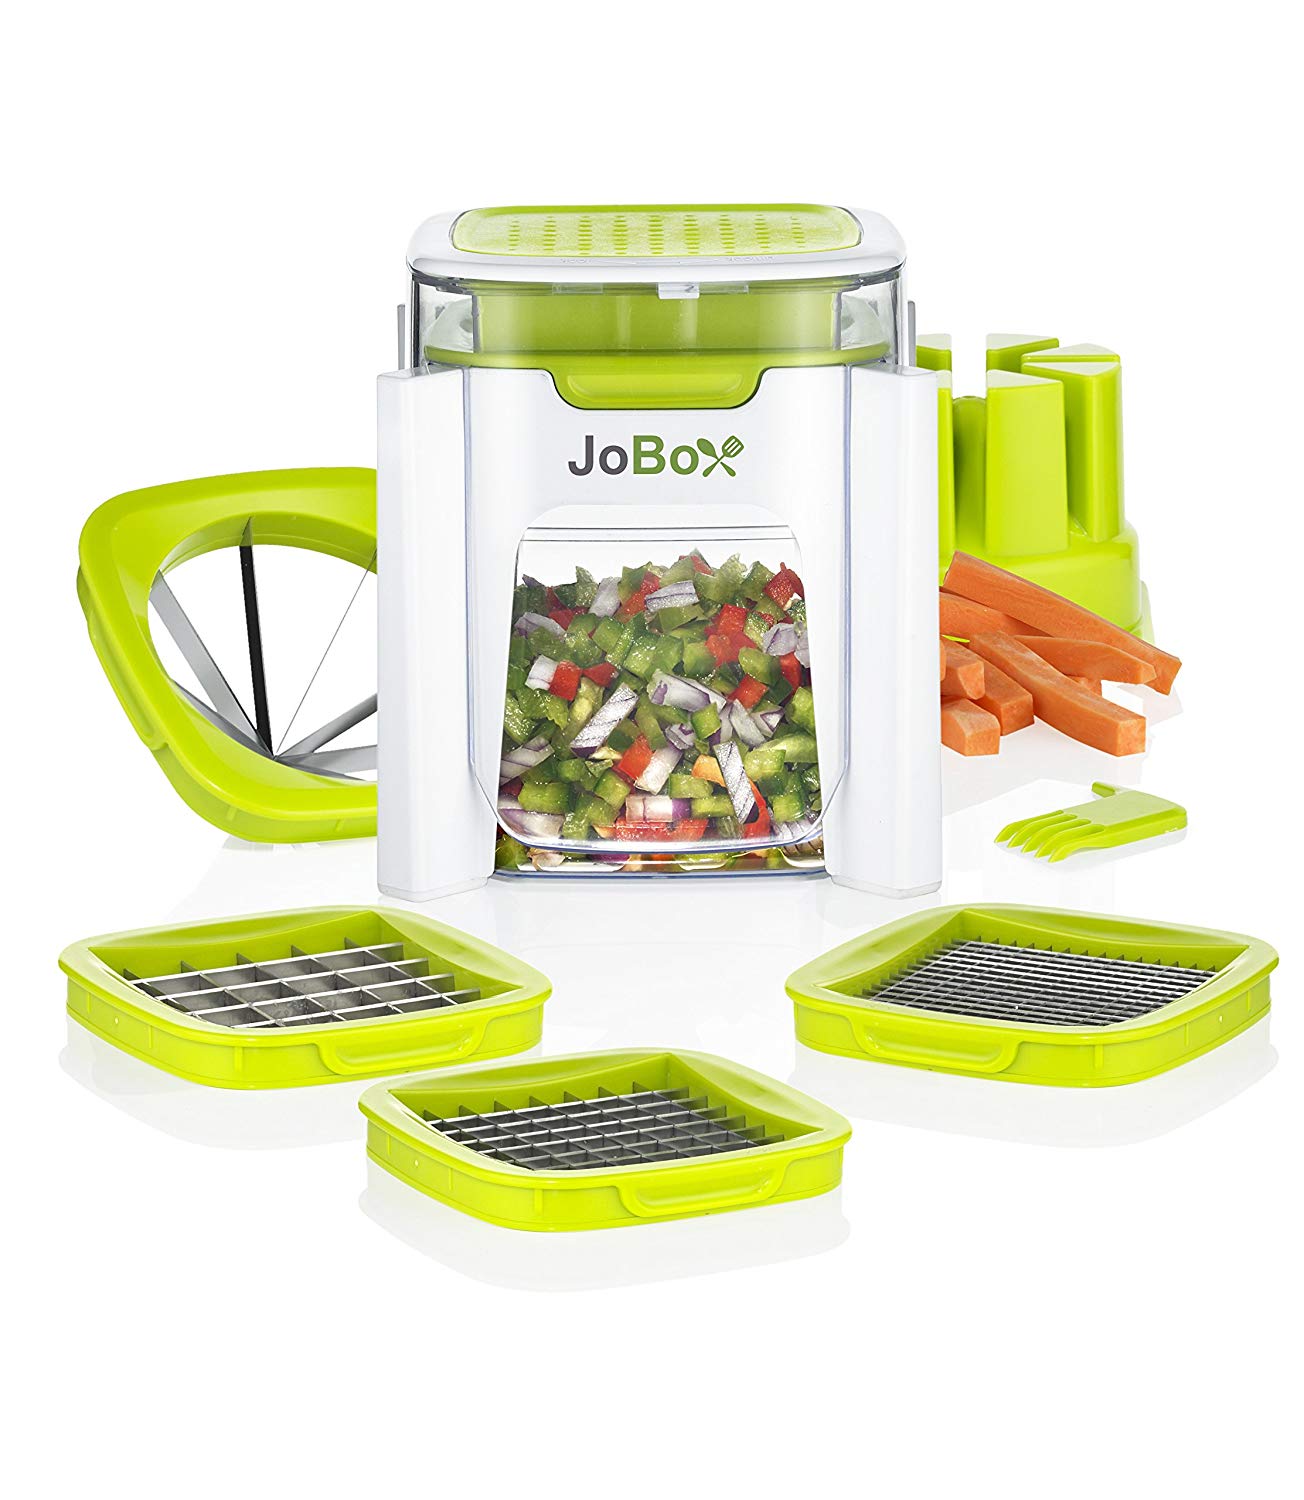 4 in 1 Vegetable Chopper, French fry cutter - Dice, Mince, Slice & Cube Fruits, Meats, Cheese & More, with 4 Stainless Steel Interchangeable Blades - Machine Washable - By Tiabo